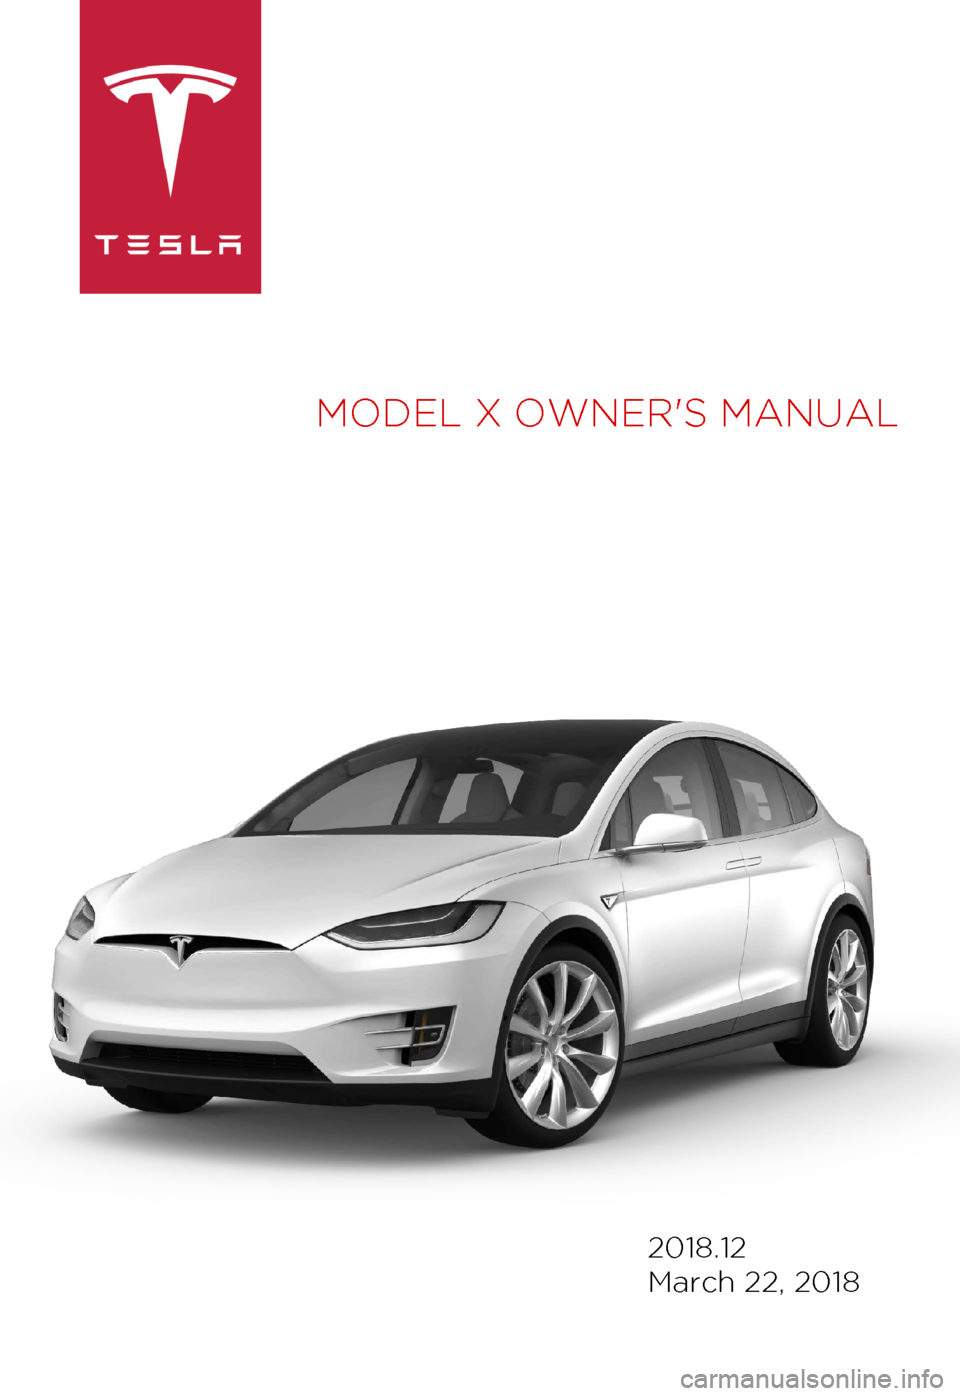 TESLA MODEL X 2018  Owners Manual  MODEL 
X OWNERS MANUAL 2018.12
March 22, 2018 